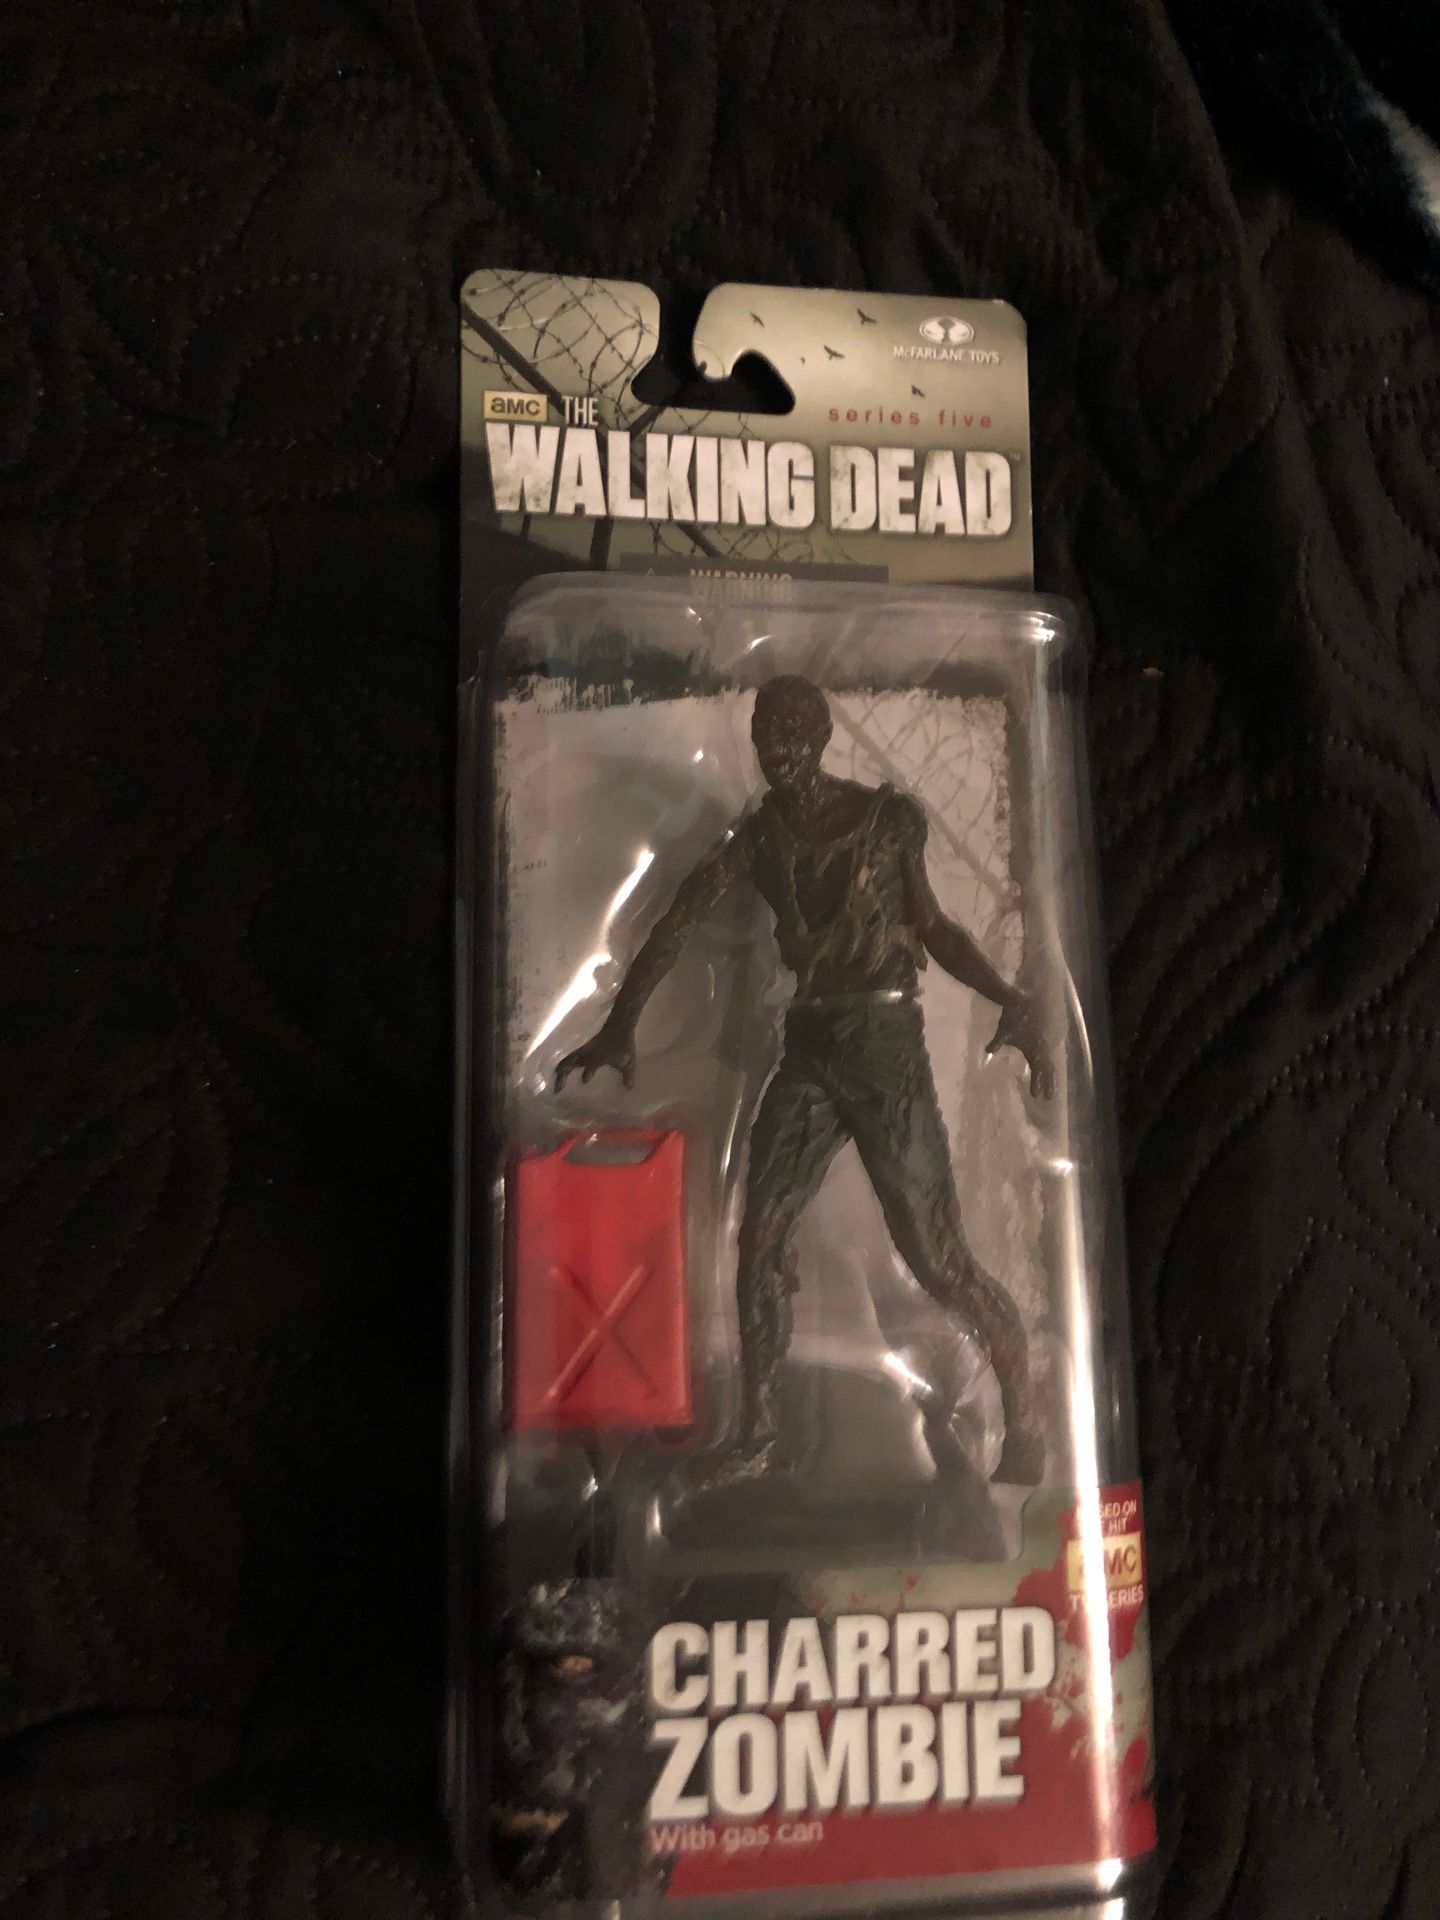 Charred zombie collectible action figure